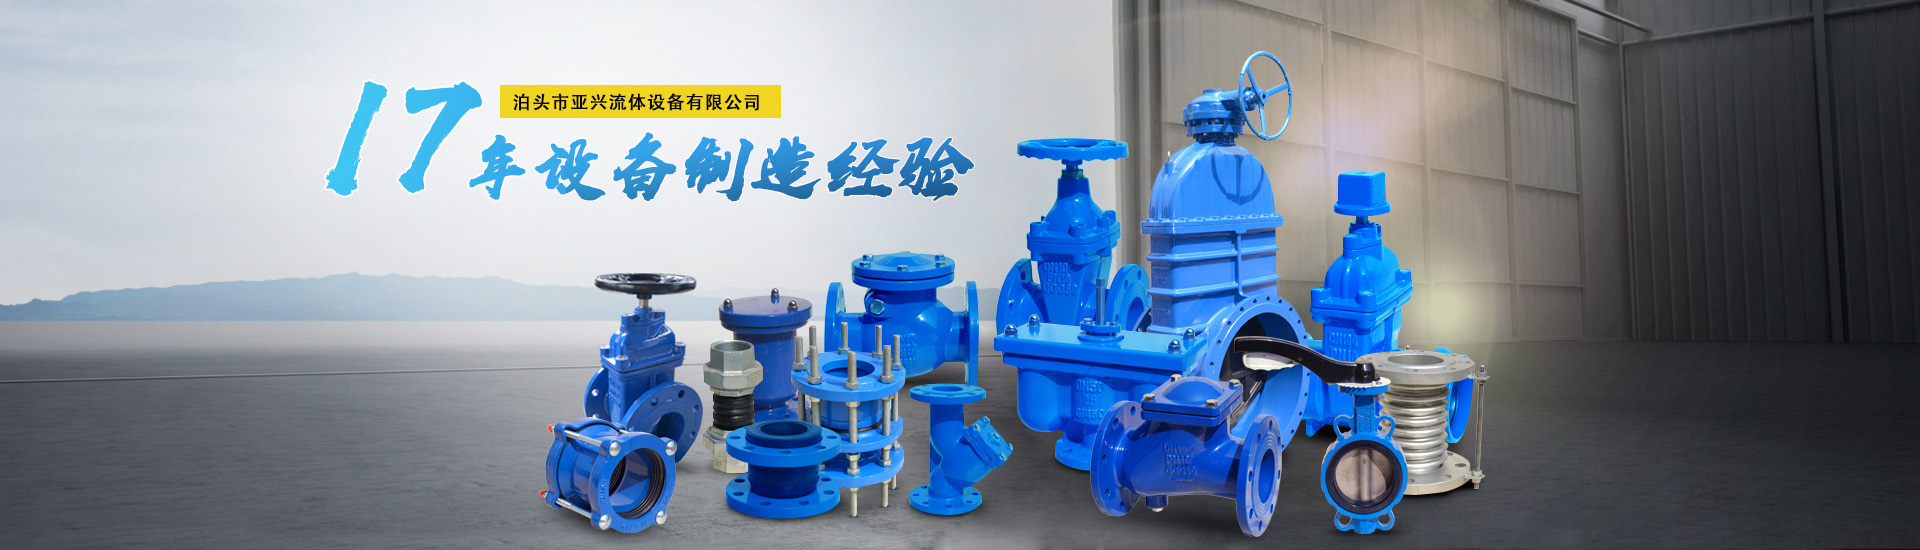 Ball check valve manufacturer: Take you to understand the ball check valve information